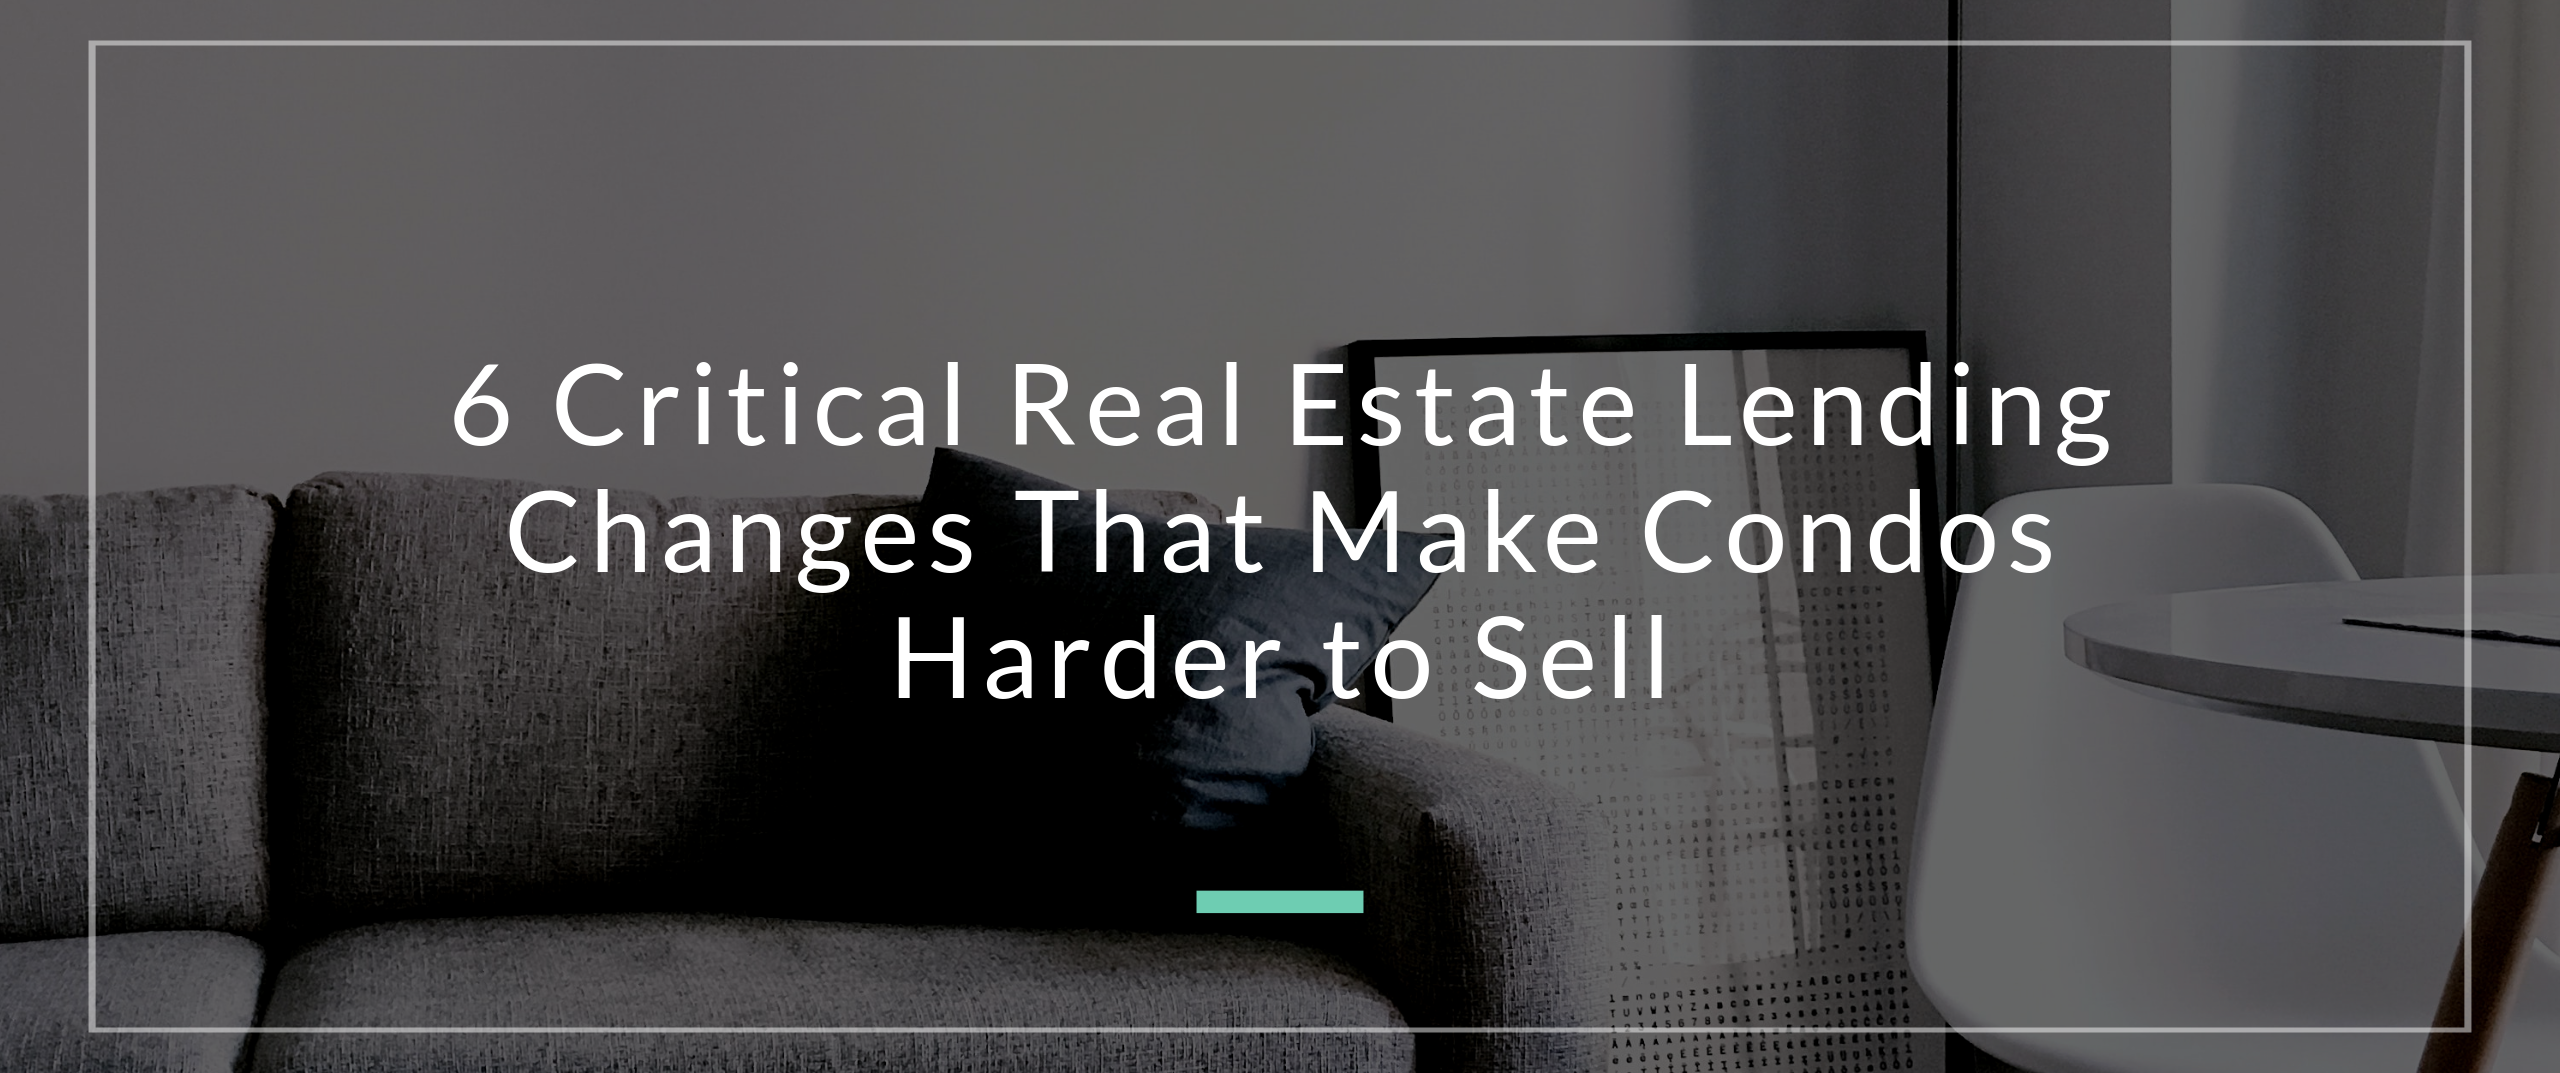 6 Critical Real Estate Lending Changes That Make Condos Harder to Sell